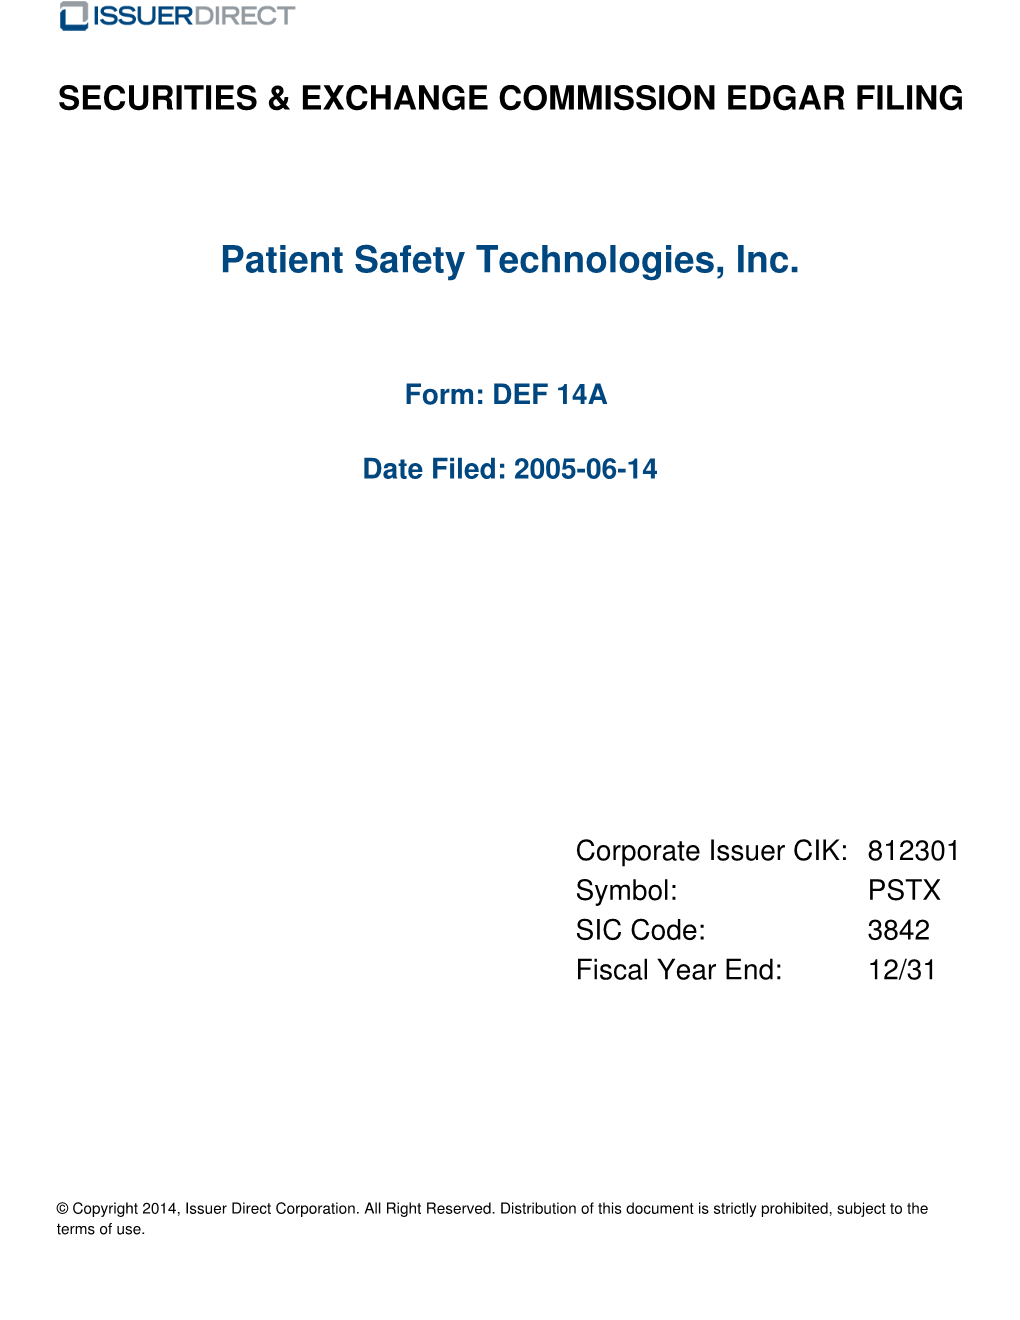 Patient Safety Technologies, Inc